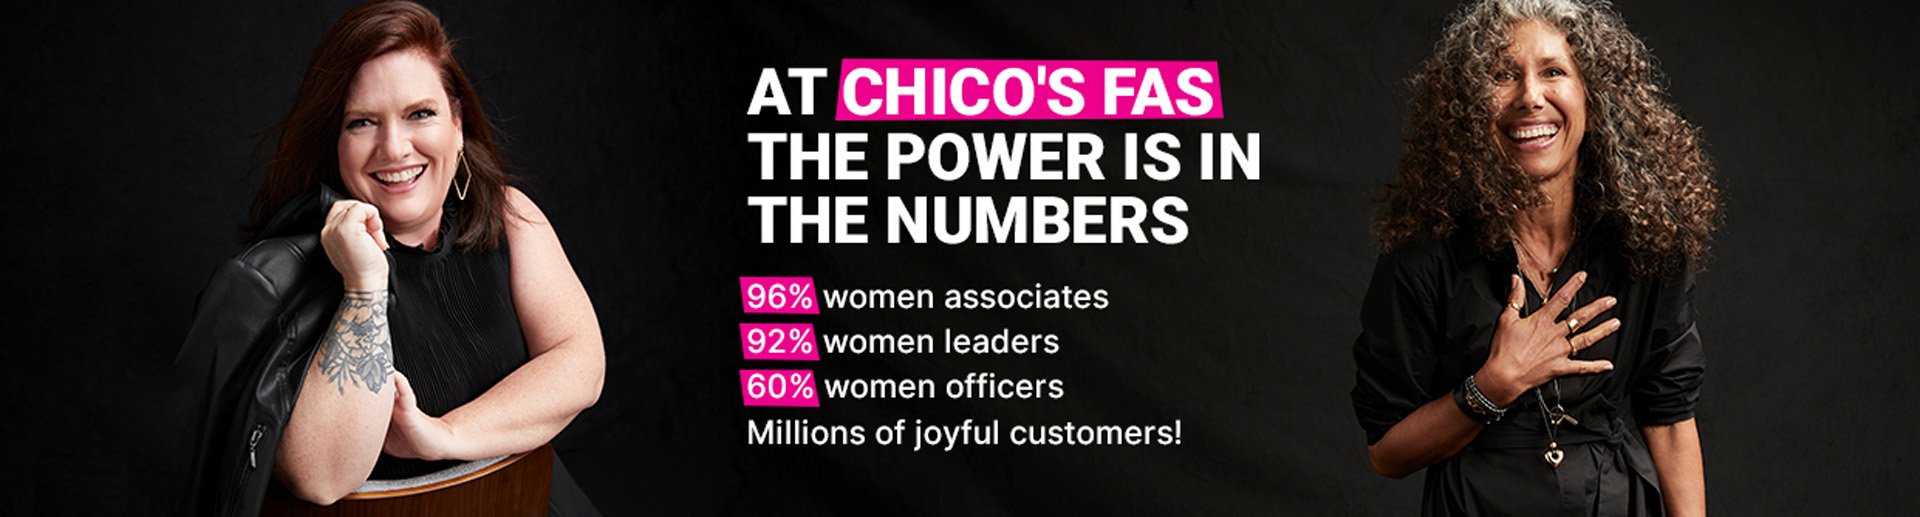 At Chico's FAS the power is in the numbers. 96% women Associates, 92% women leaders, 60% women officers.